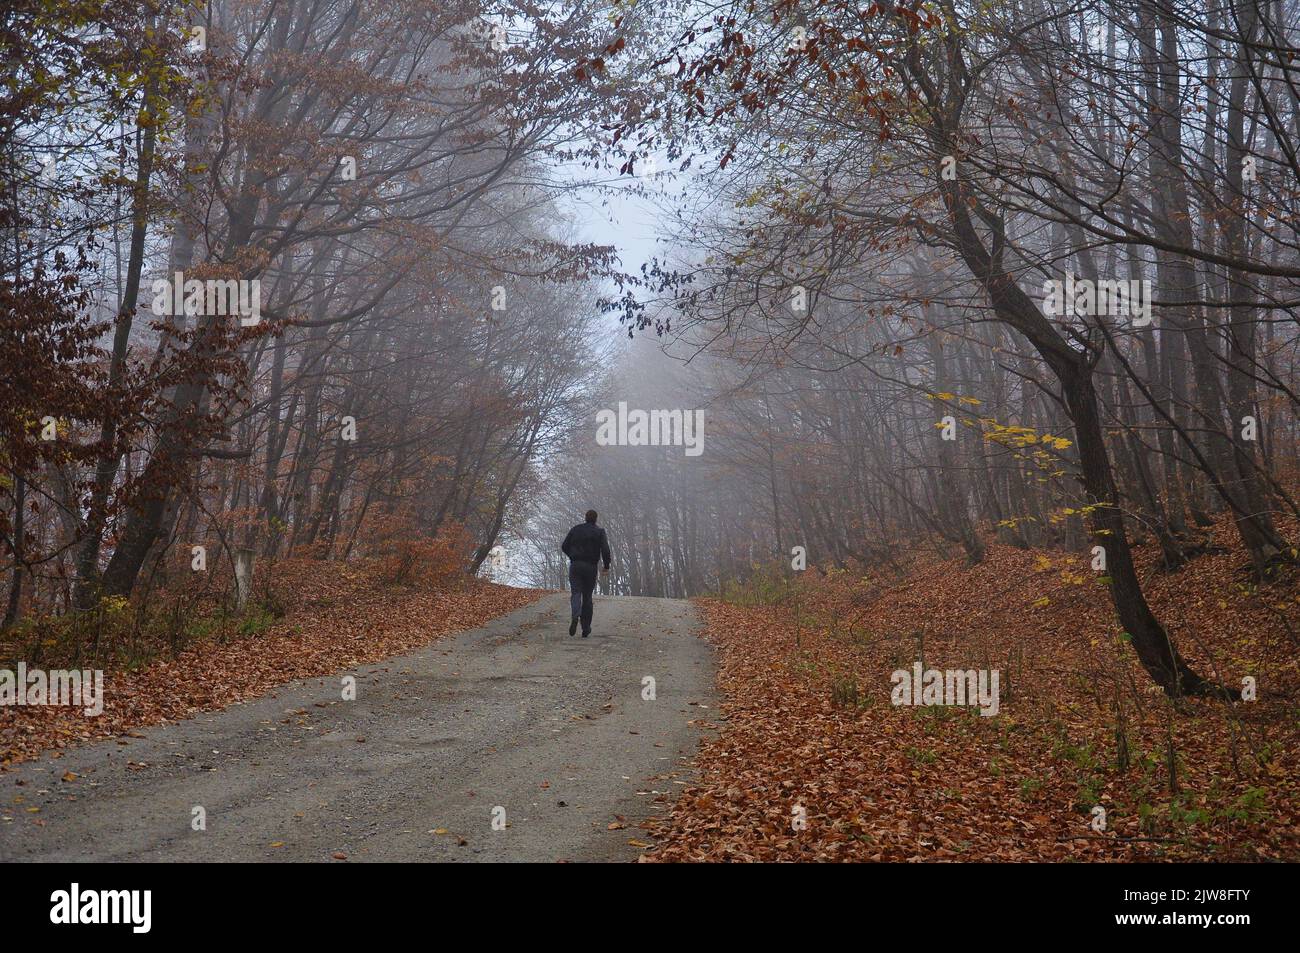 A male from behind running on a narrow road in a forest during autumn, Dilijan, Tavush, Armenia Stock Photo